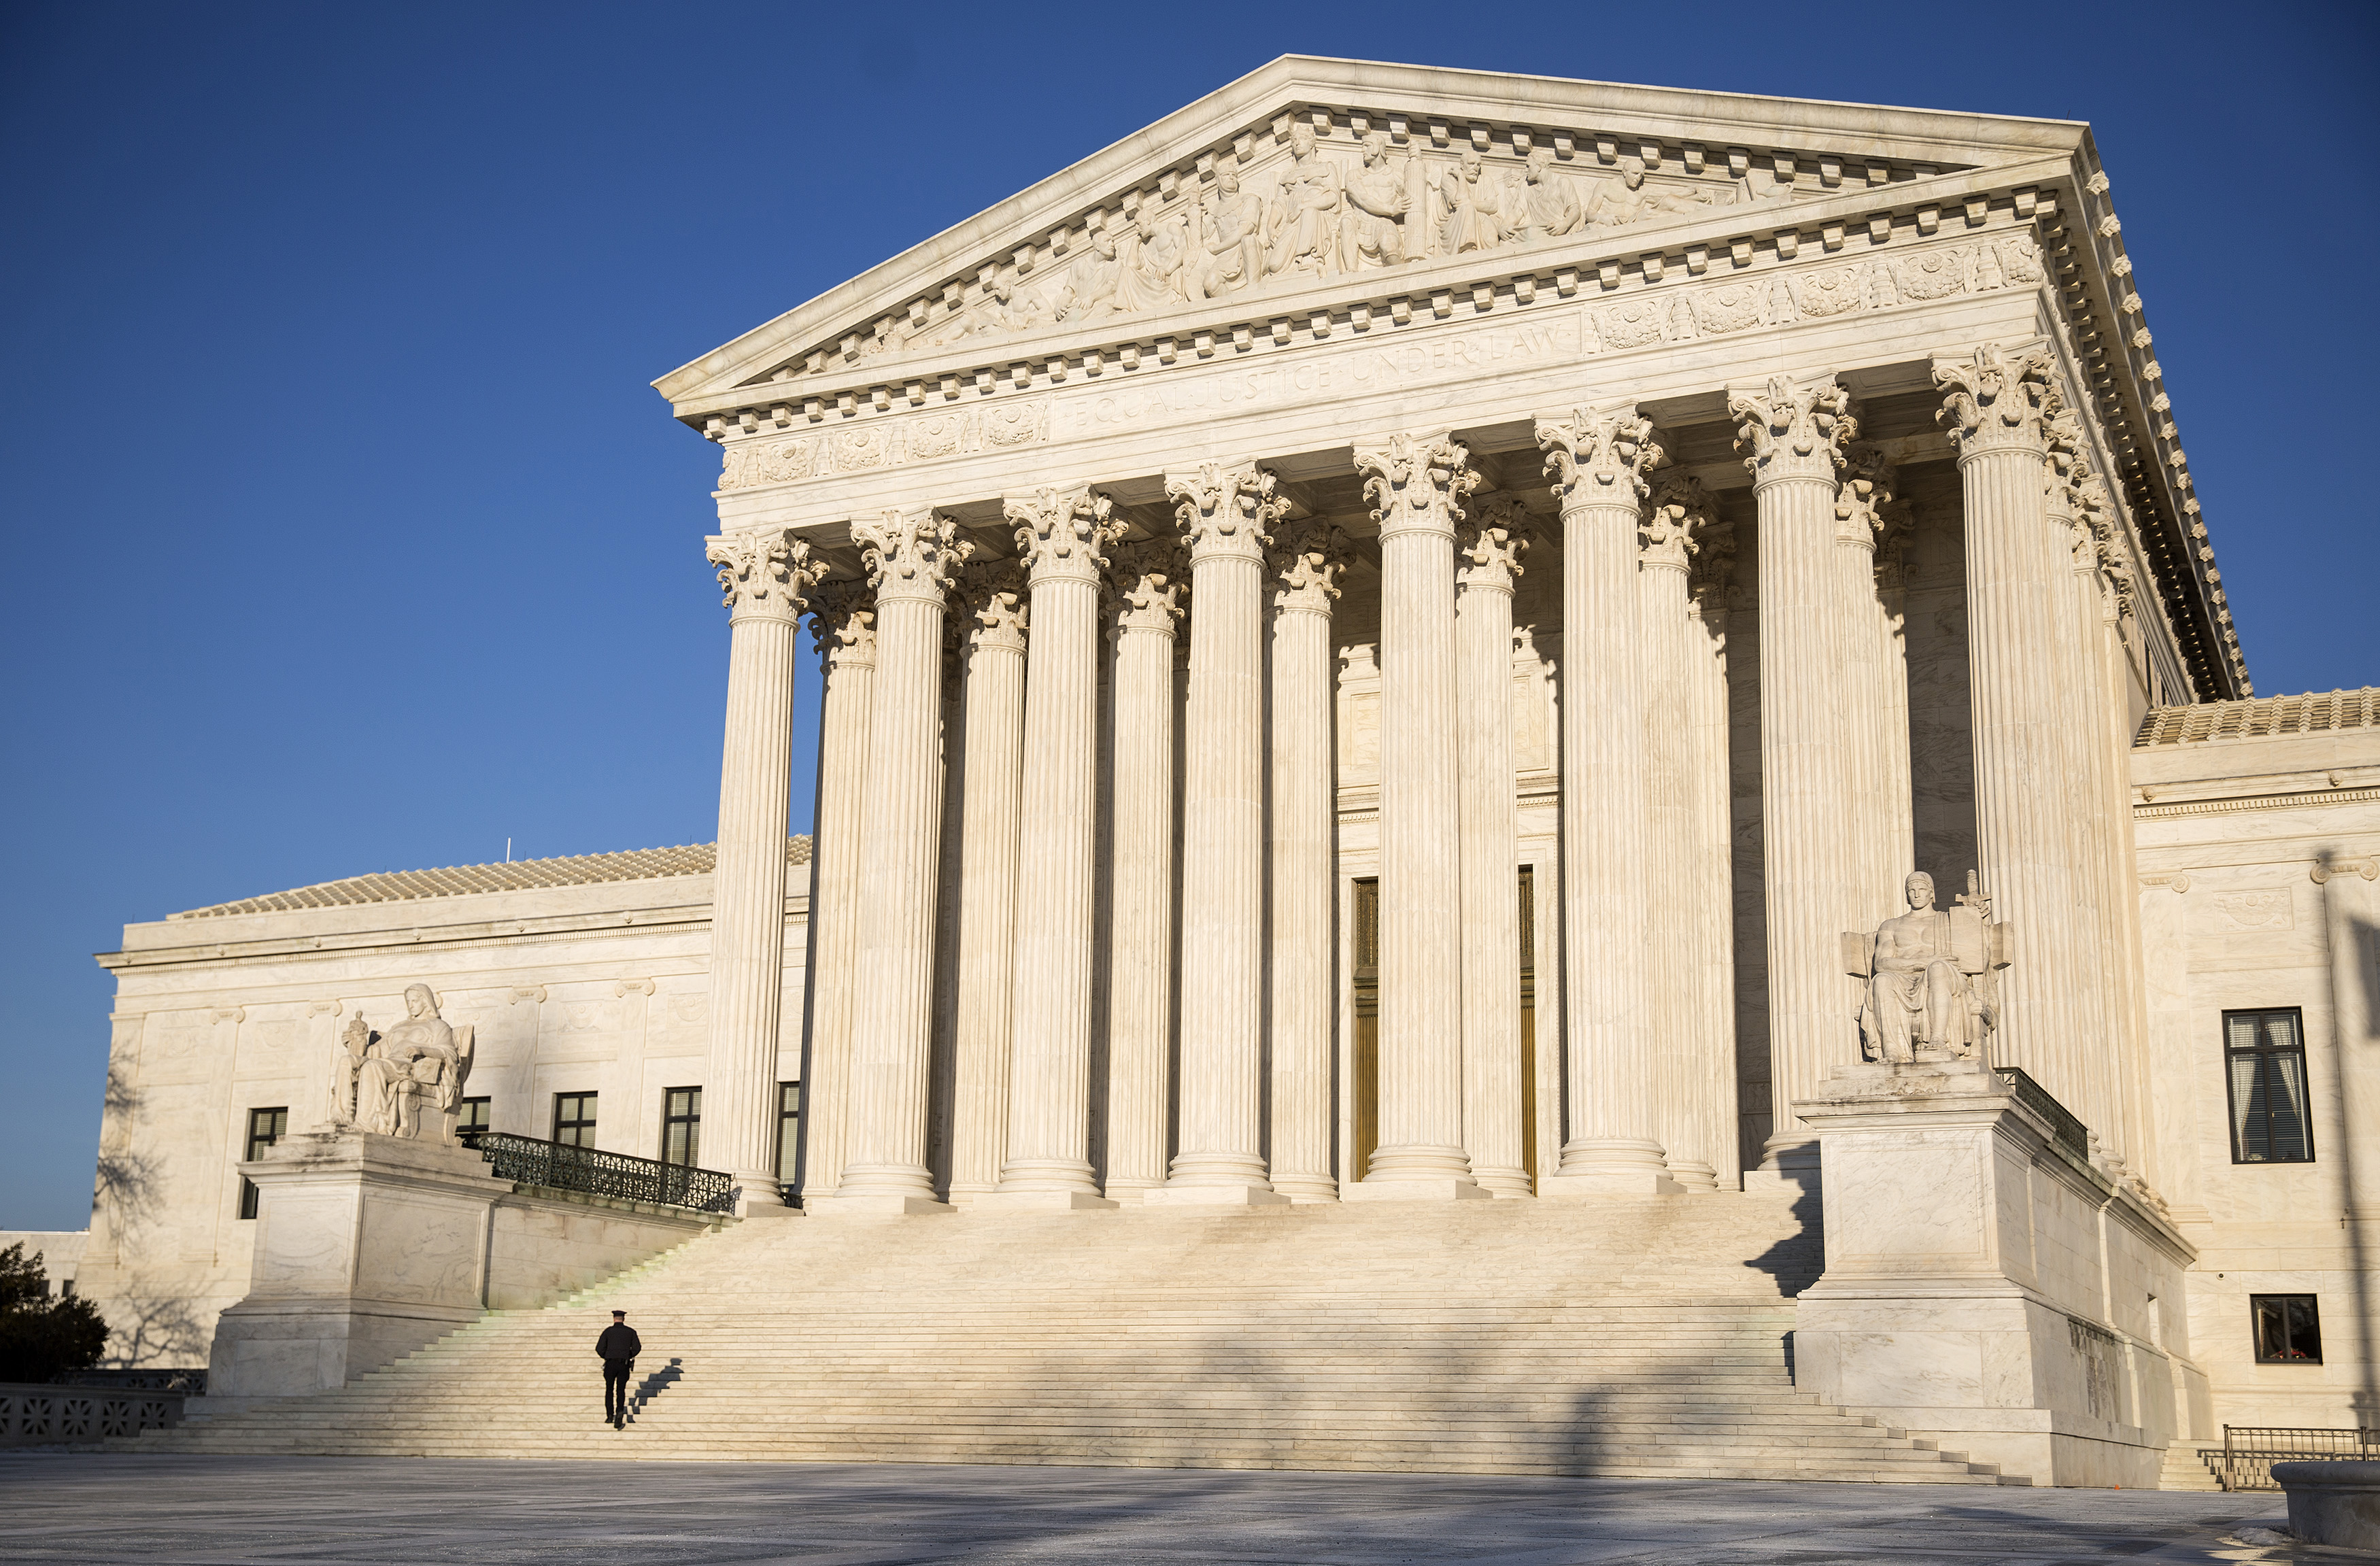 A police officer walks up the steps of the Supreme Court in Washington